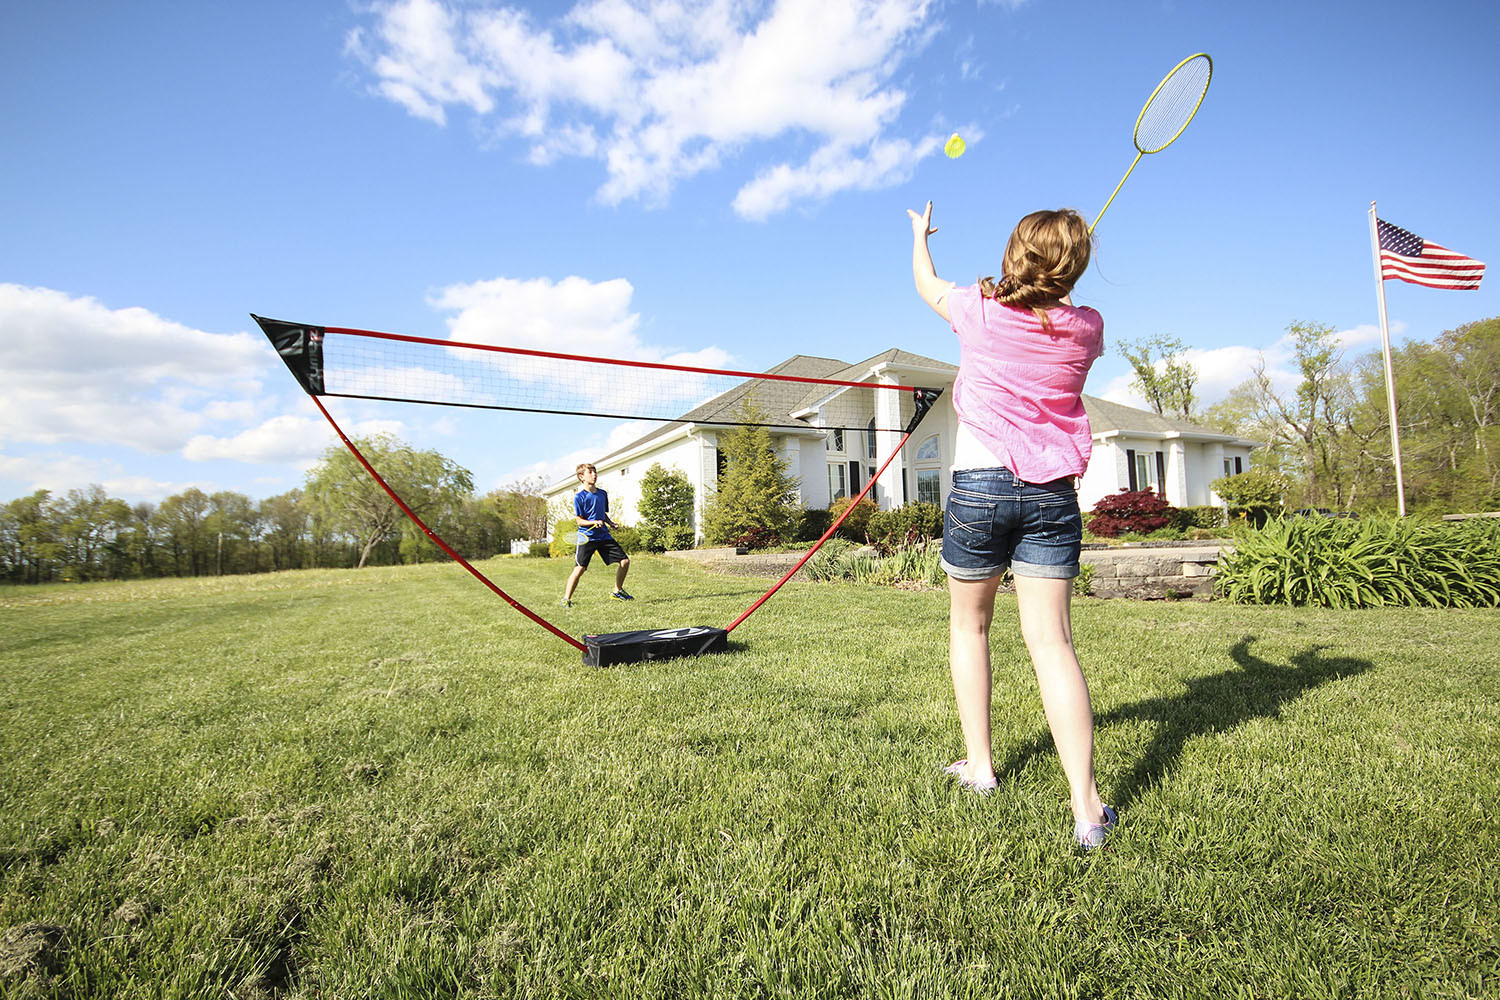 Zume Games Portable Badminton Set with Freestanding Base Sets Up on Any  Surface in Seconds. No Tools or Stakes Required